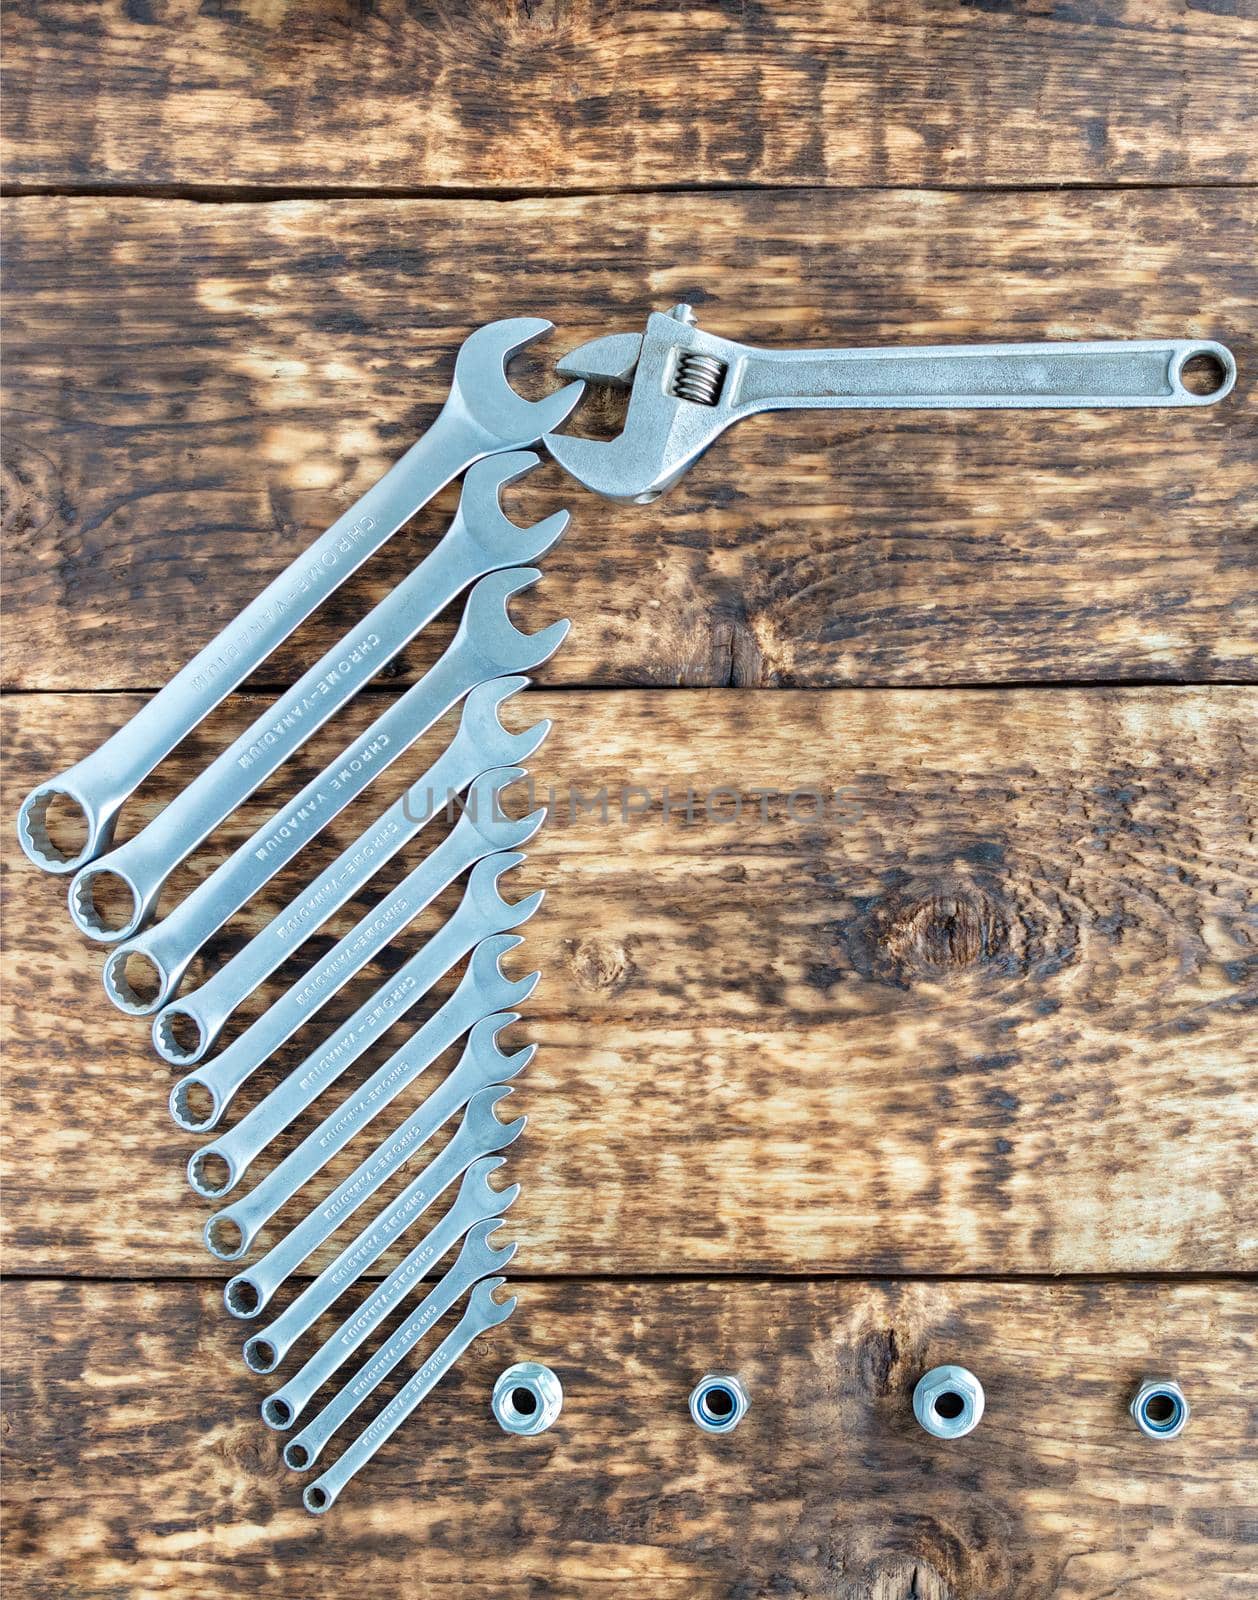 A set of wrenches with chrome vanadium and an adjustable wrench on a background of old wooden boards. Copy space, vertical image, close-up.